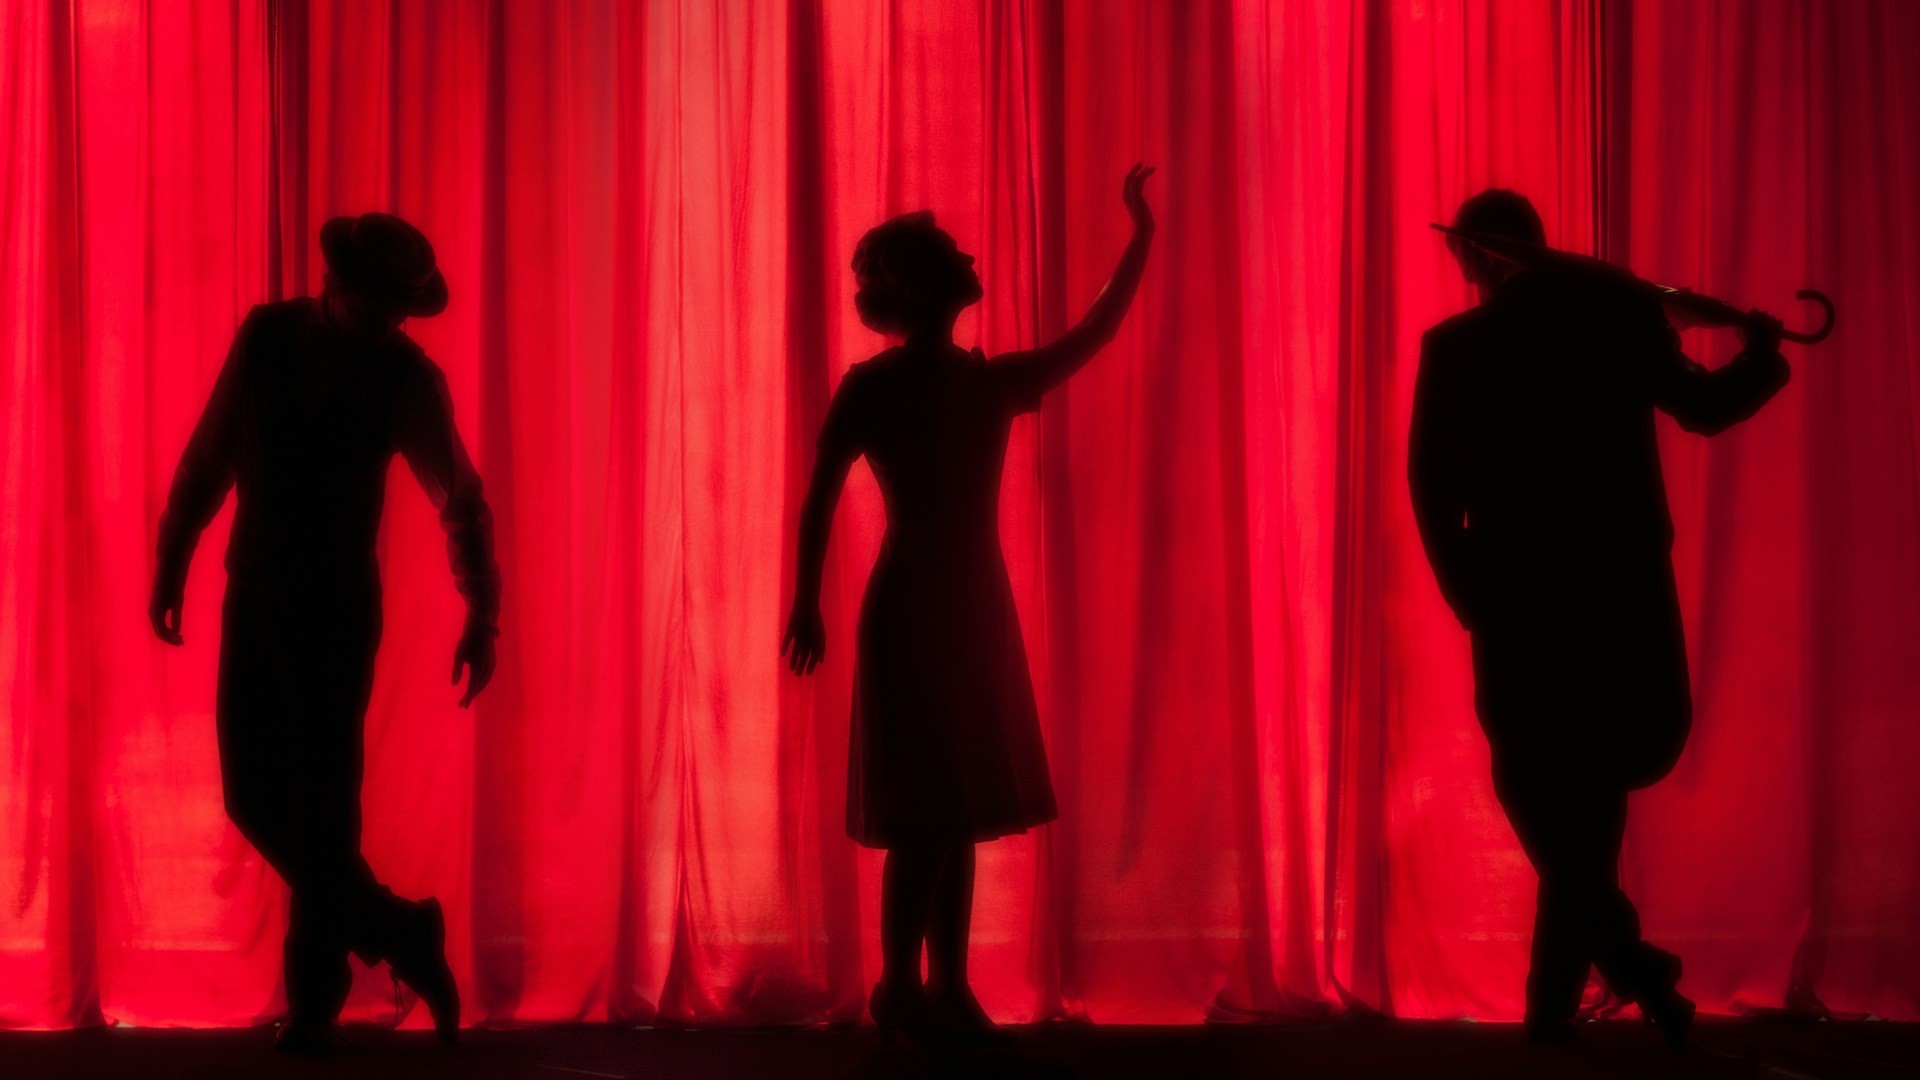 Characters on stage behind a red theatre curtain